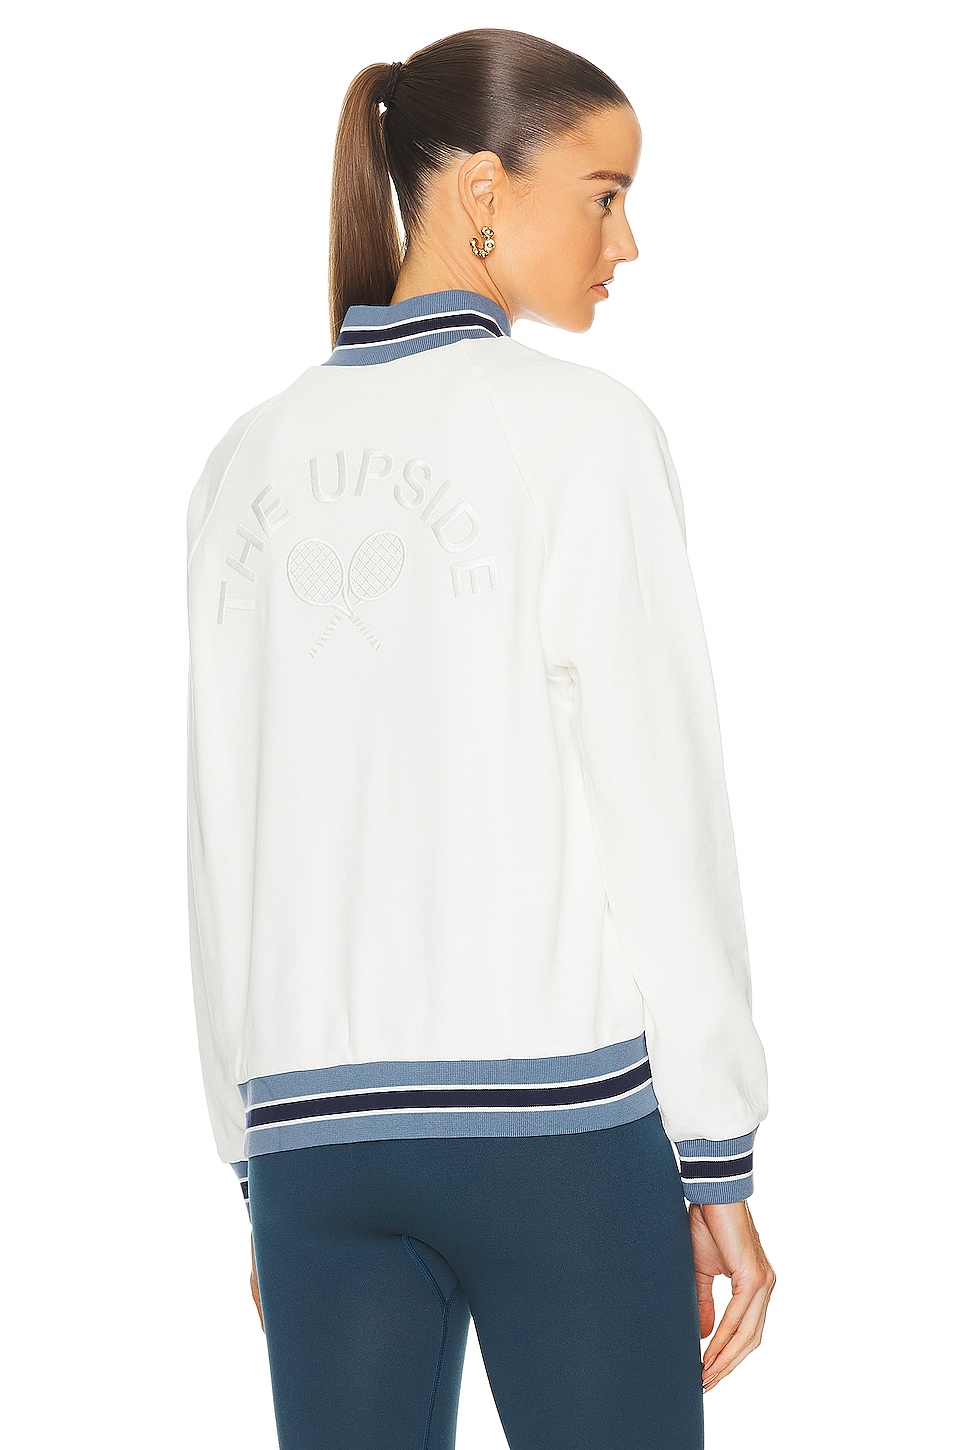 Image 1 of THE UPSIDE Bounce Quinn Jacket in White